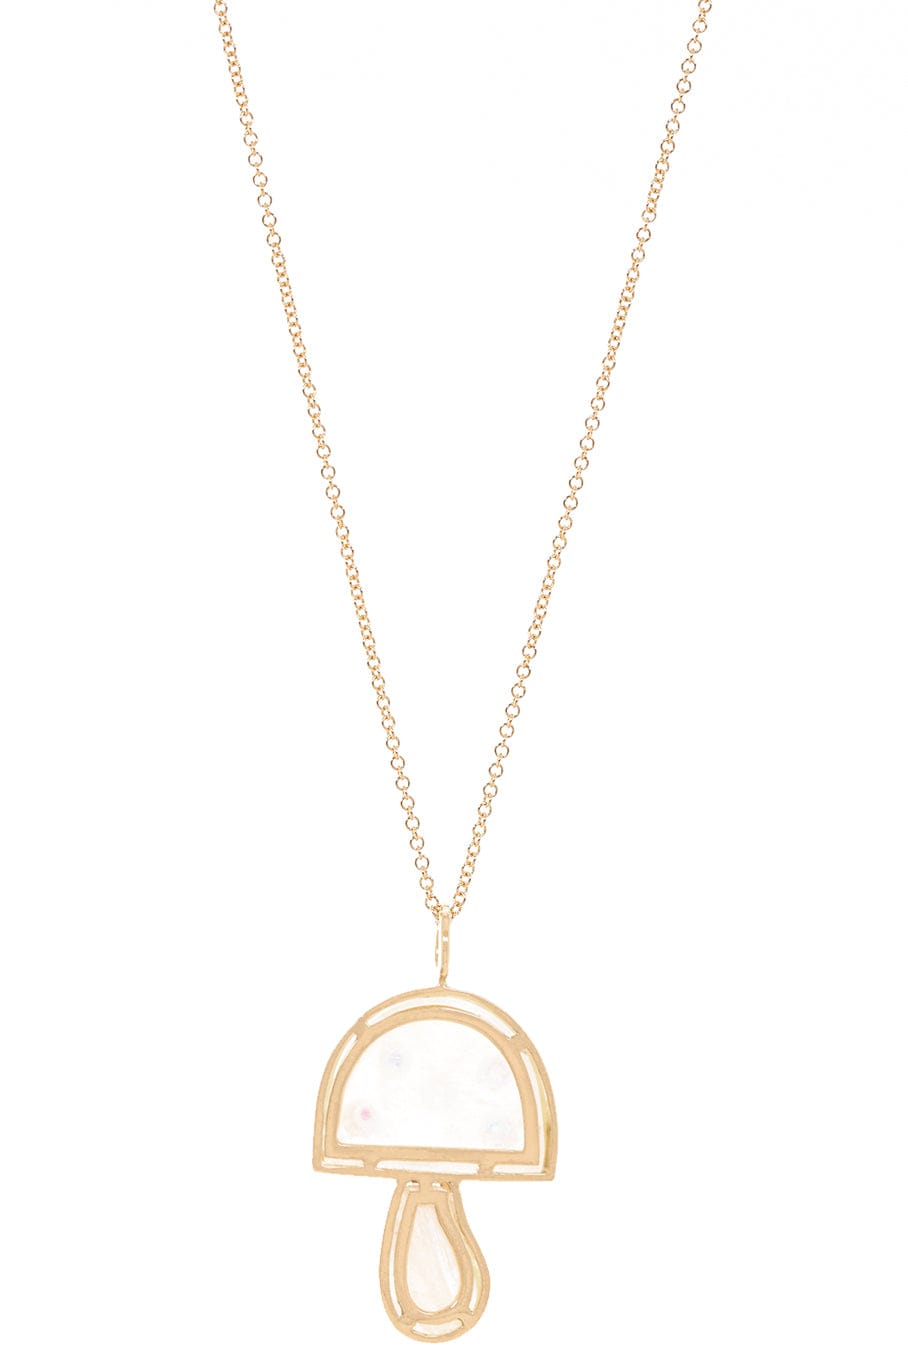 BRENT NEALE-Moostone Small Mushroom Necklace-YELLOW GOLD